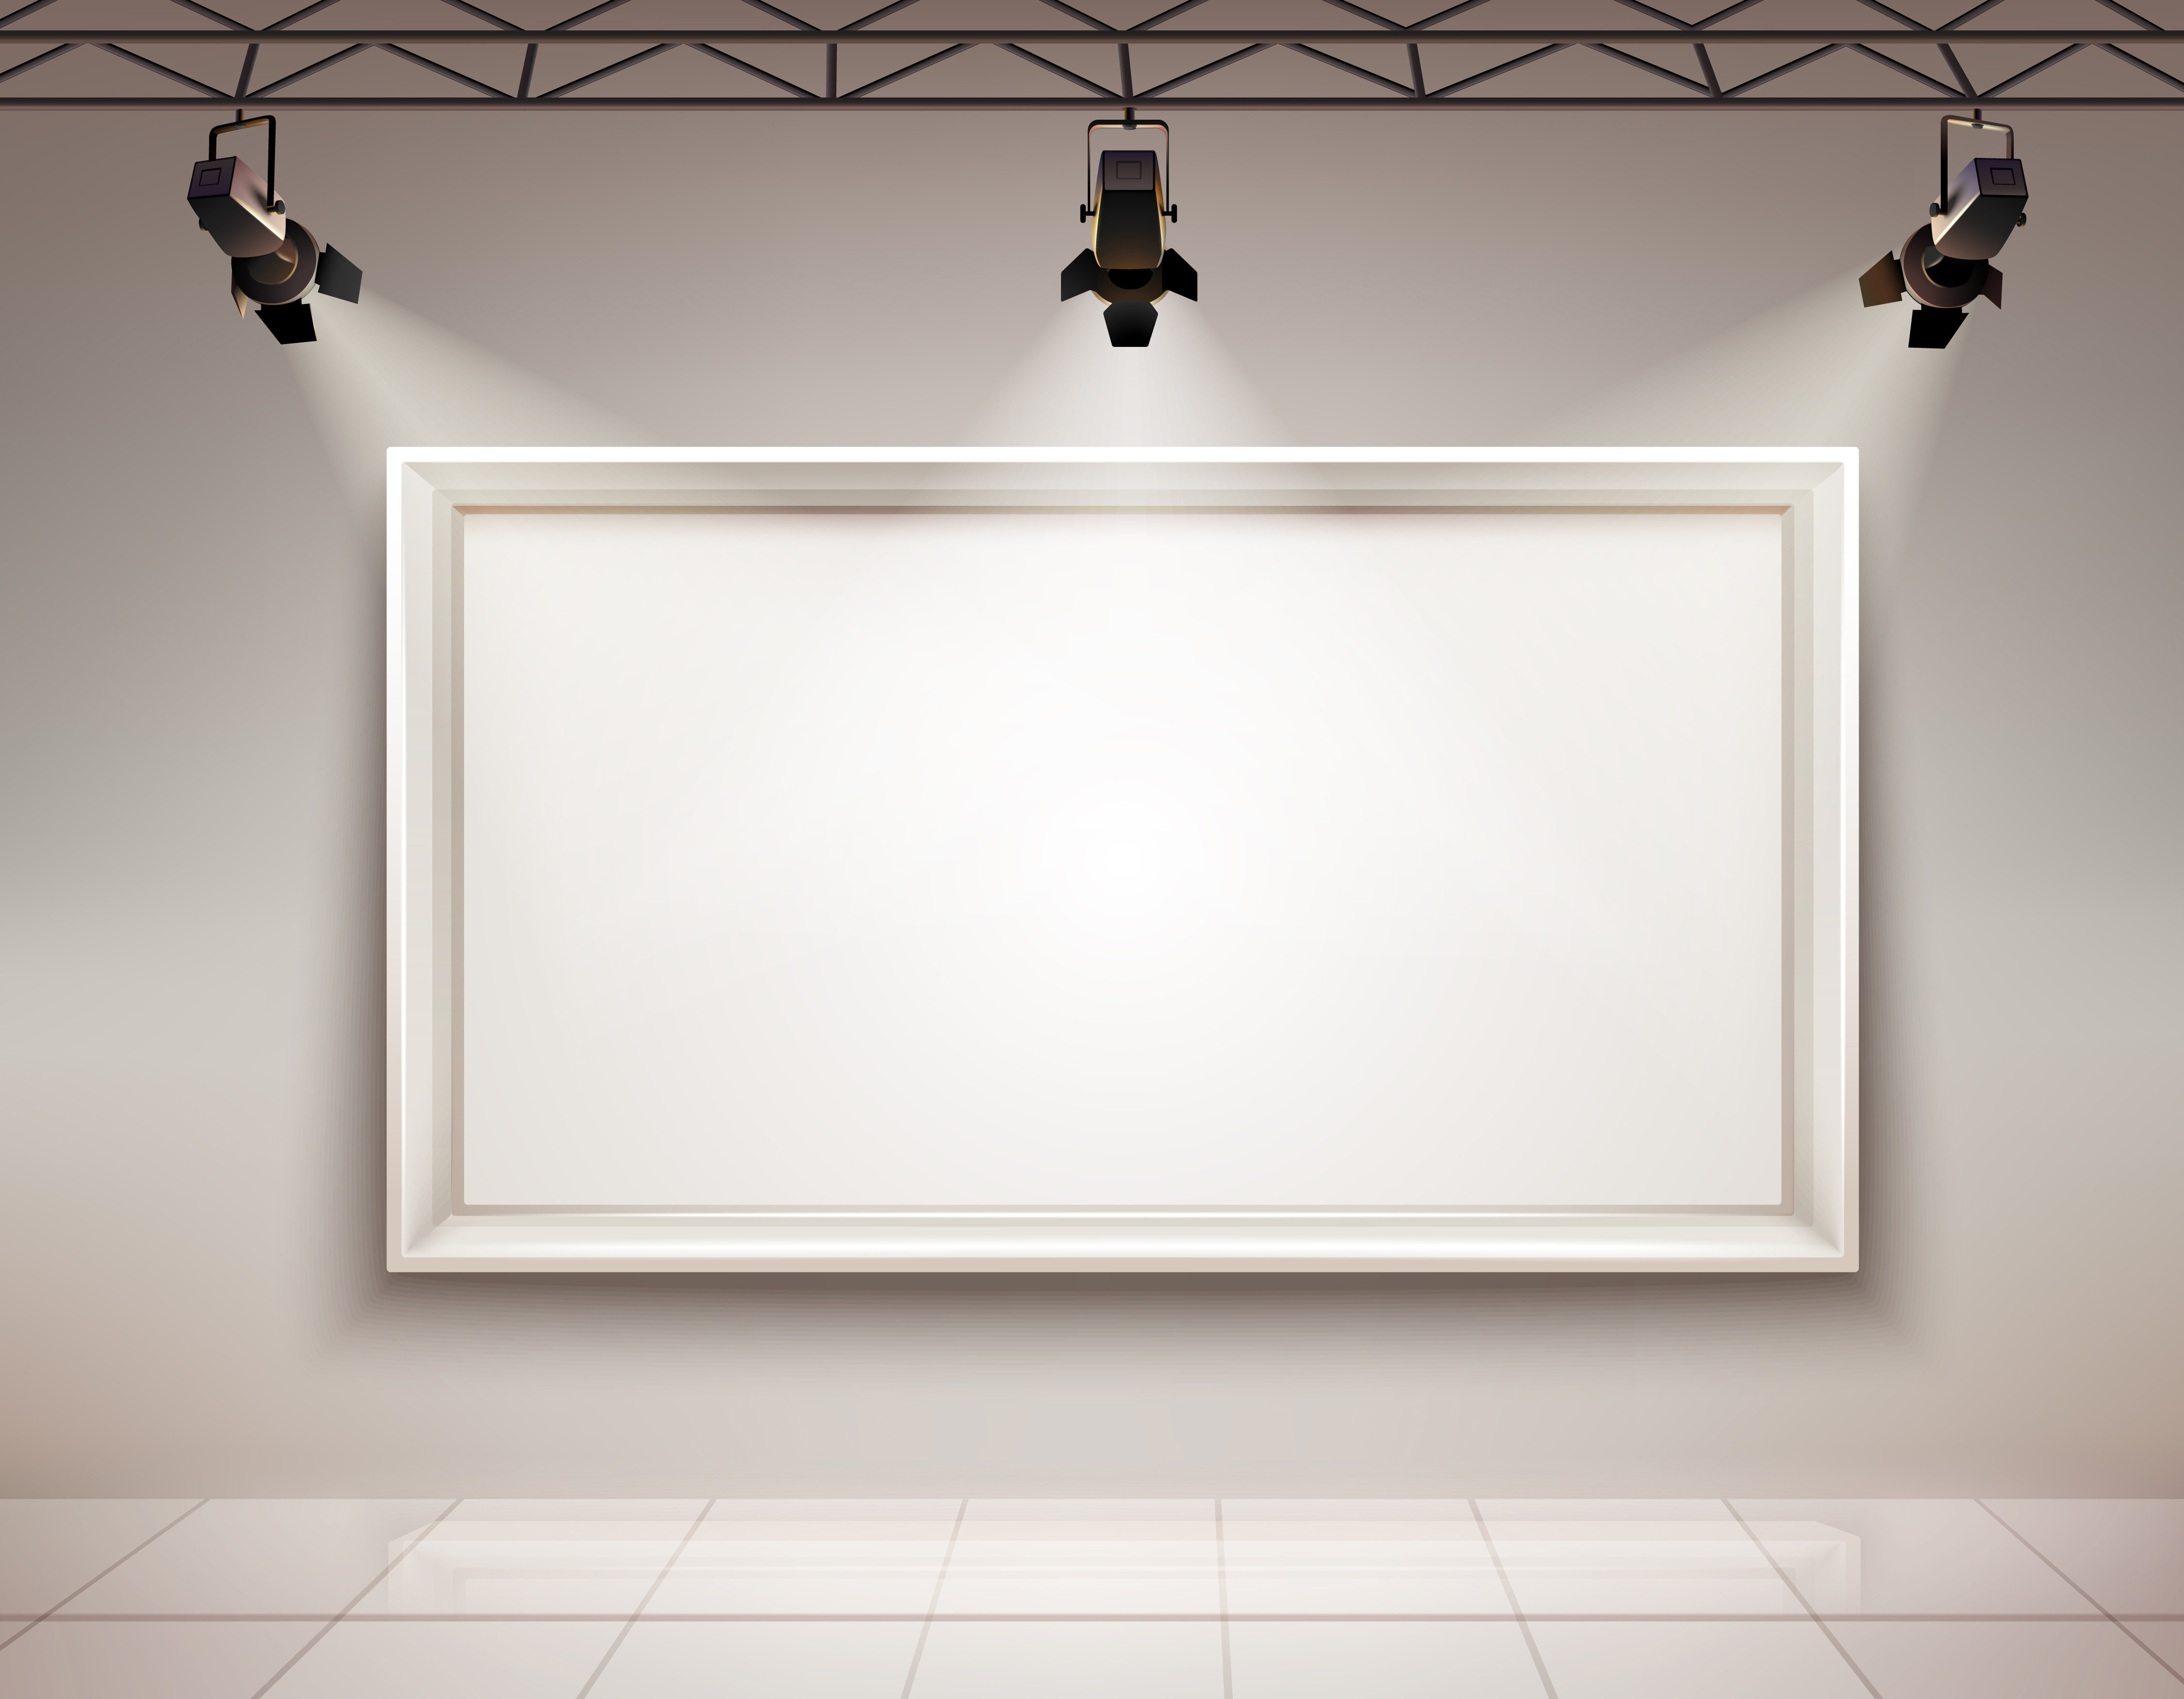 Picture Frame Illuminated 428150 Download Free Vectors, Clipart